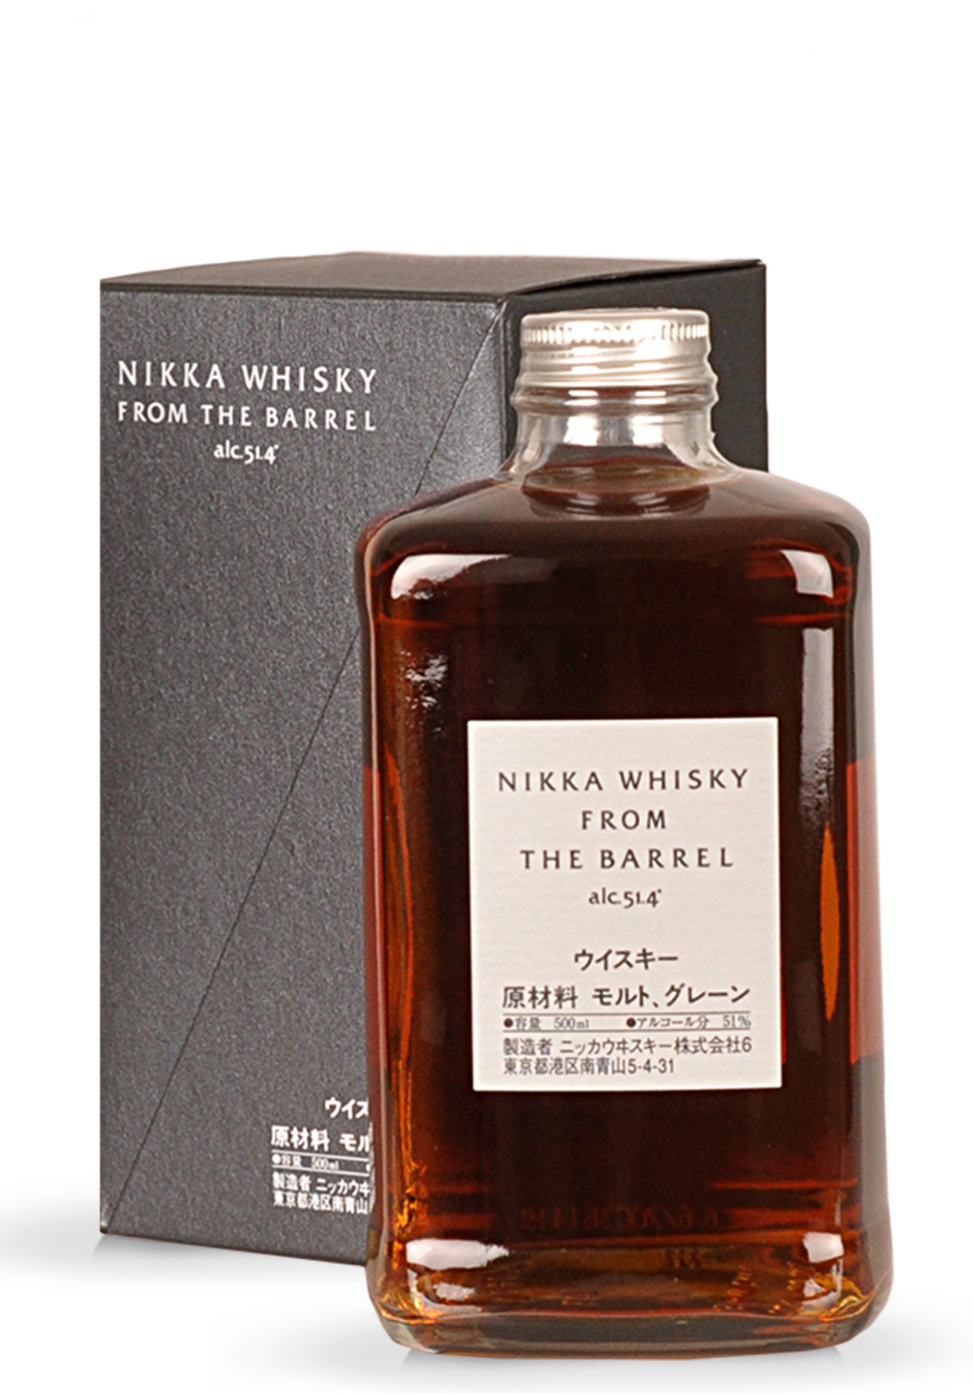 Whisky Nikka From the Barrel (0.5L) Image